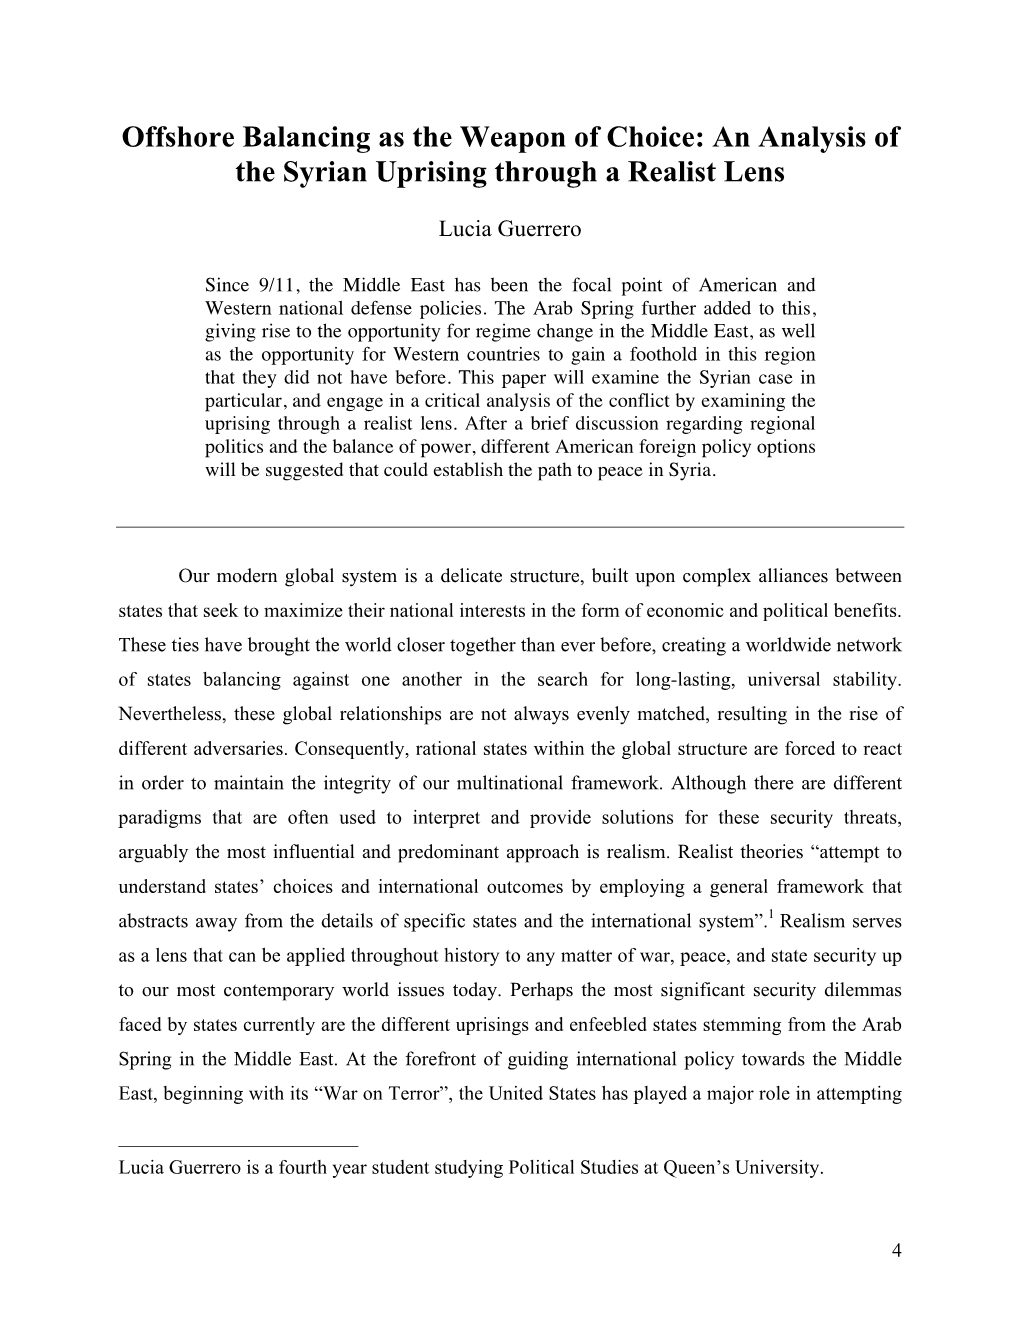 Offshore Balancing As the Weapon of Choice: an Analysis of the Syrian Uprising Through a Realist Lens